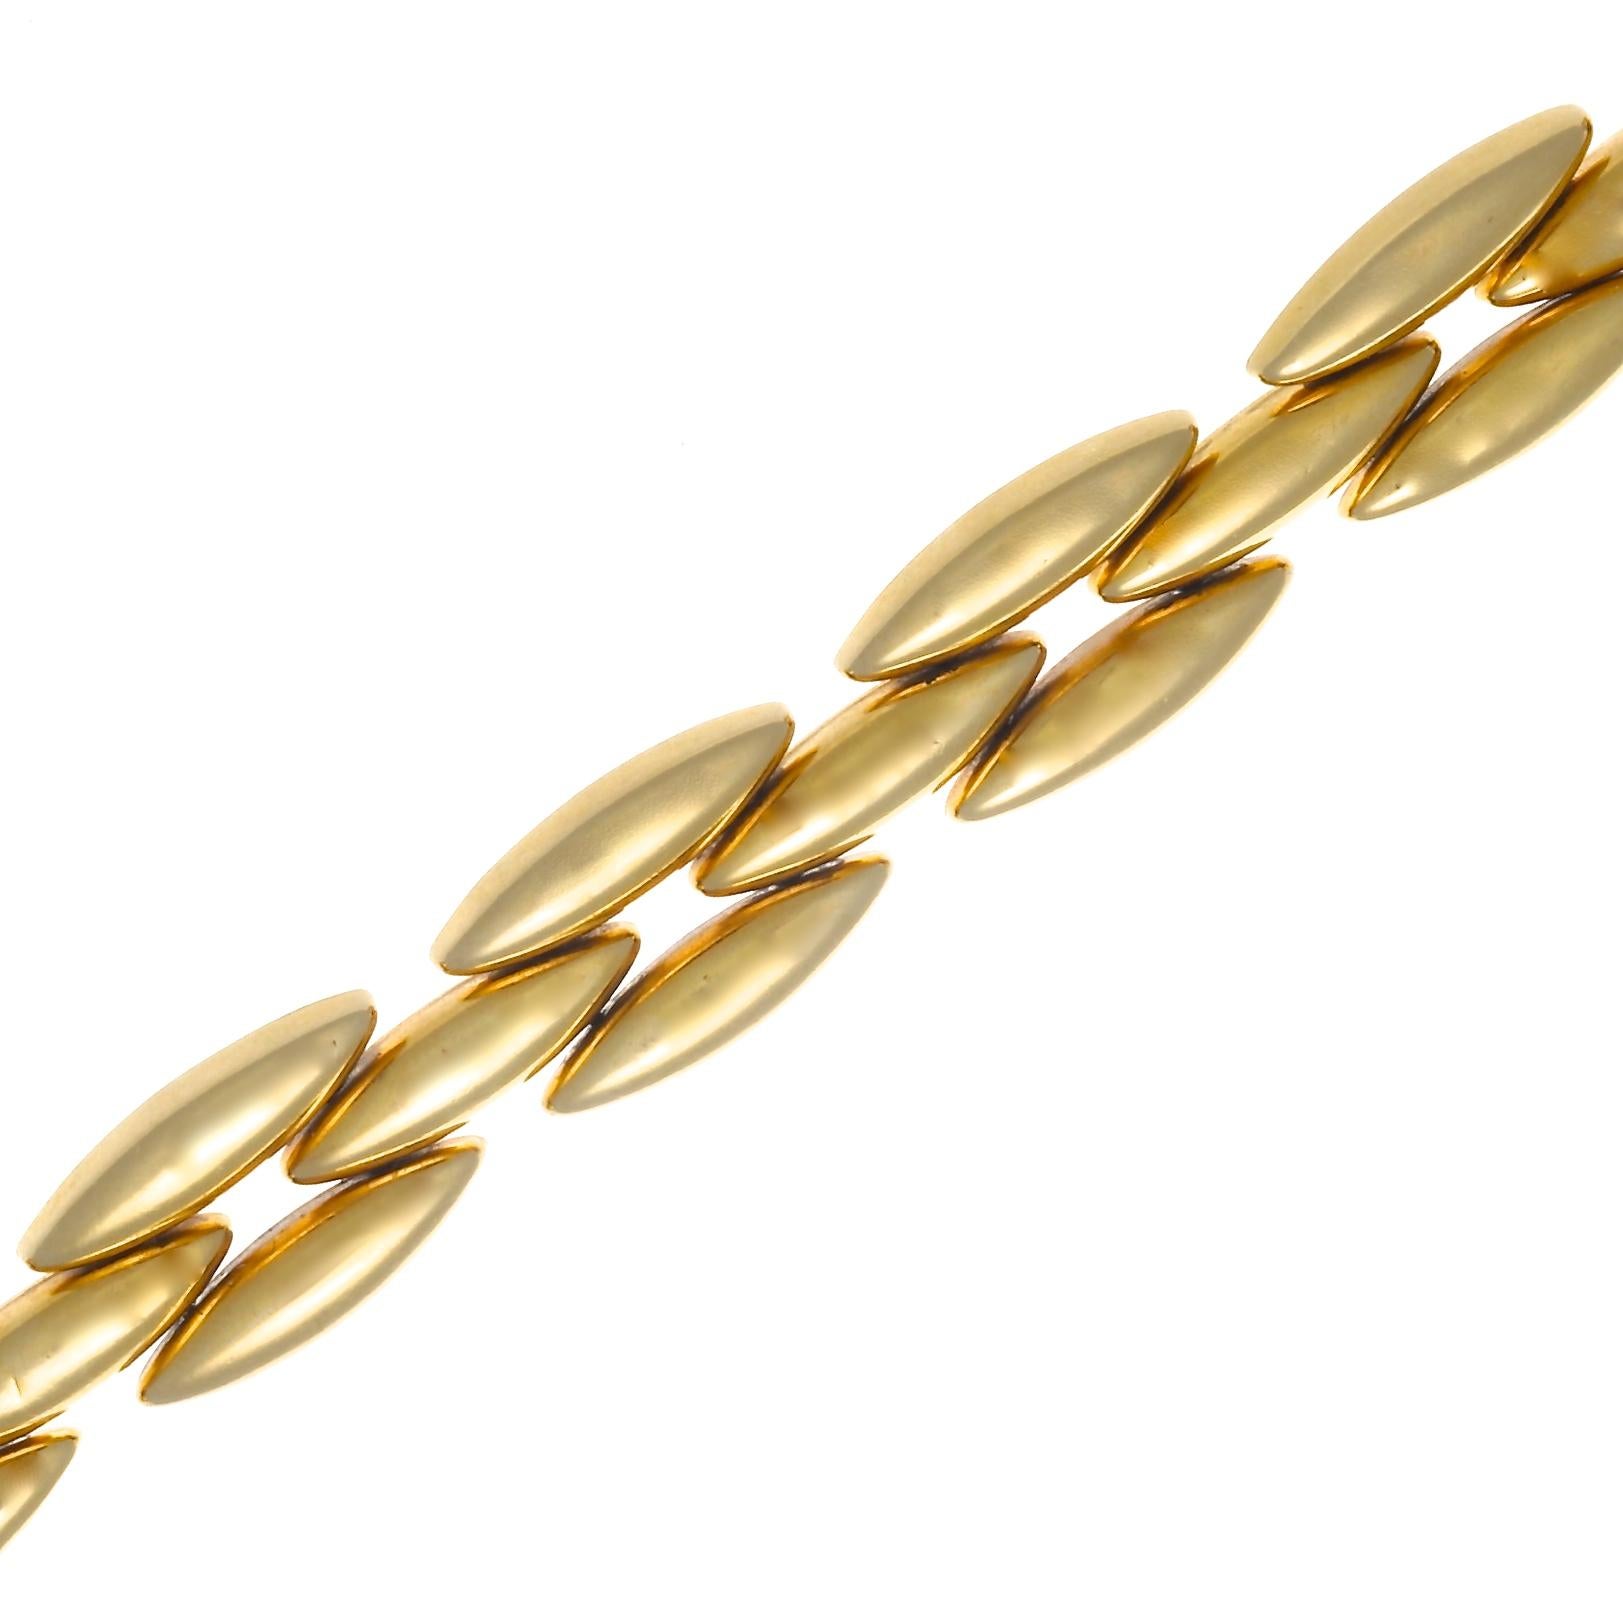 The perfect elegant 18k gold link bracelet to add to your favorites, but definitely makes the cut for wearing solo. Authentic 1990's signed Cartier Maillion Panther 18k gold bracelet. 26.9 grams. 7-1/2 inches long. Stamped with makers mark and 750